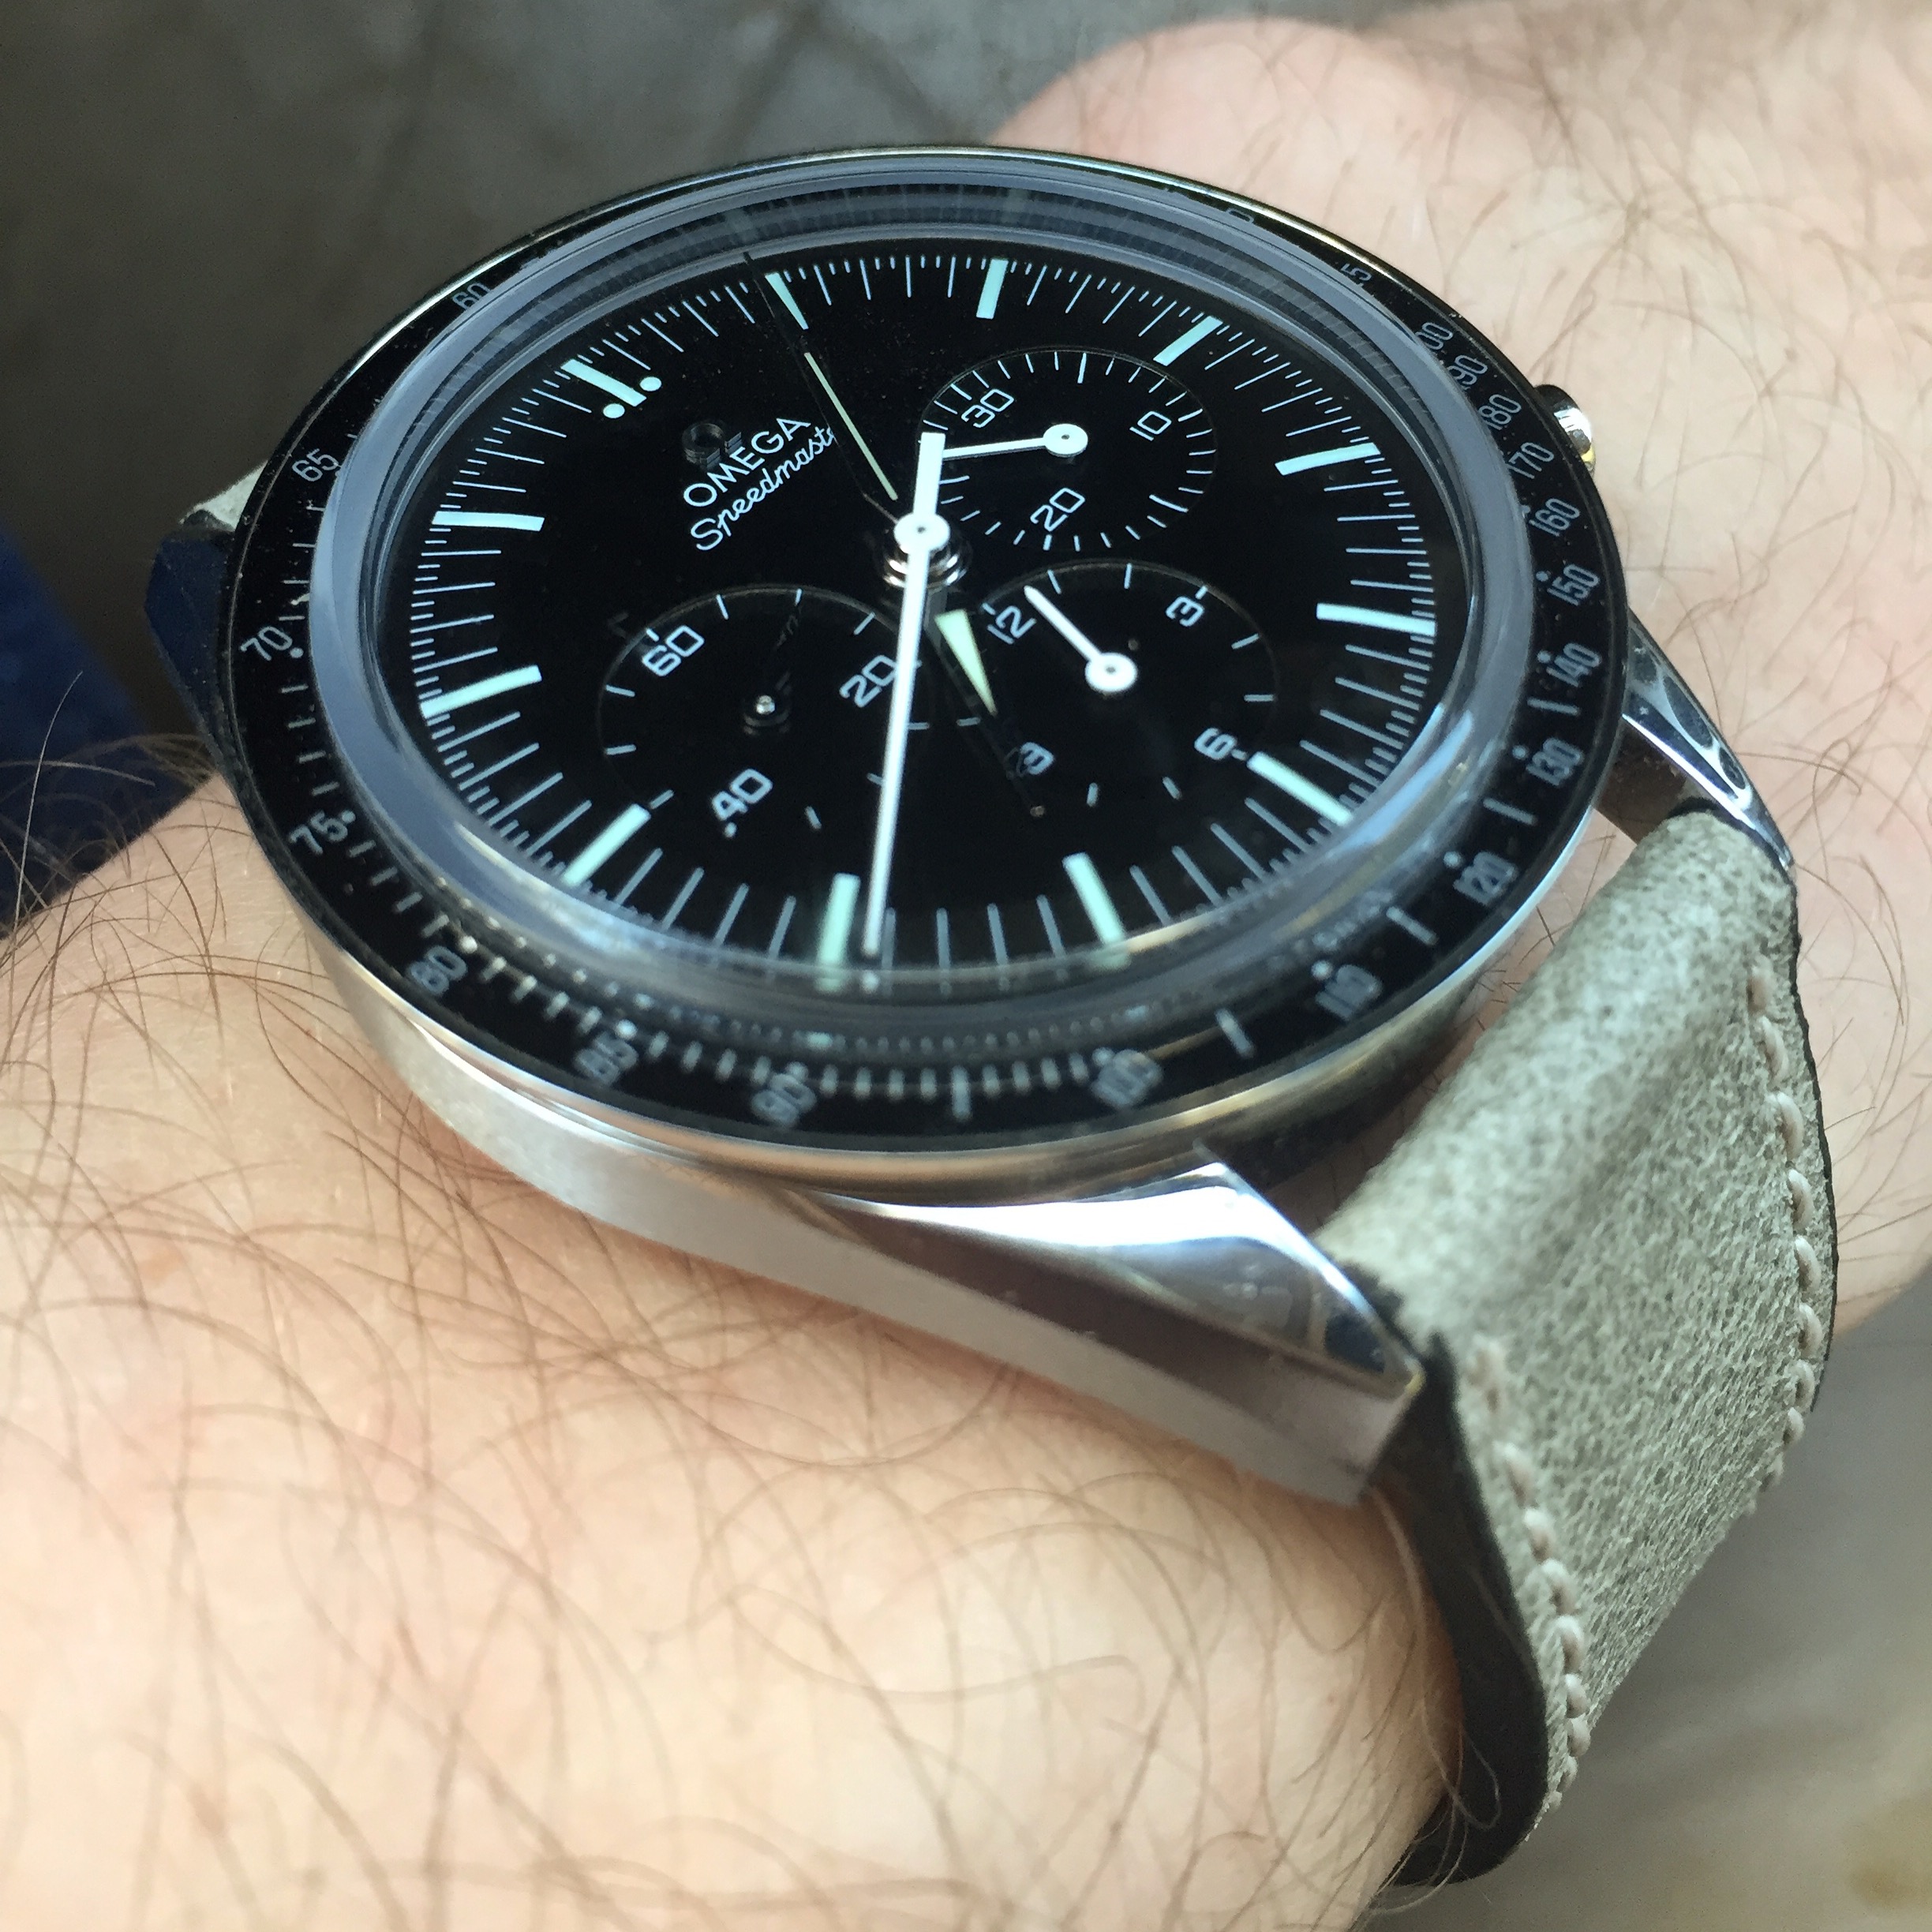 First Omega In Space (2012 Speedmaster 